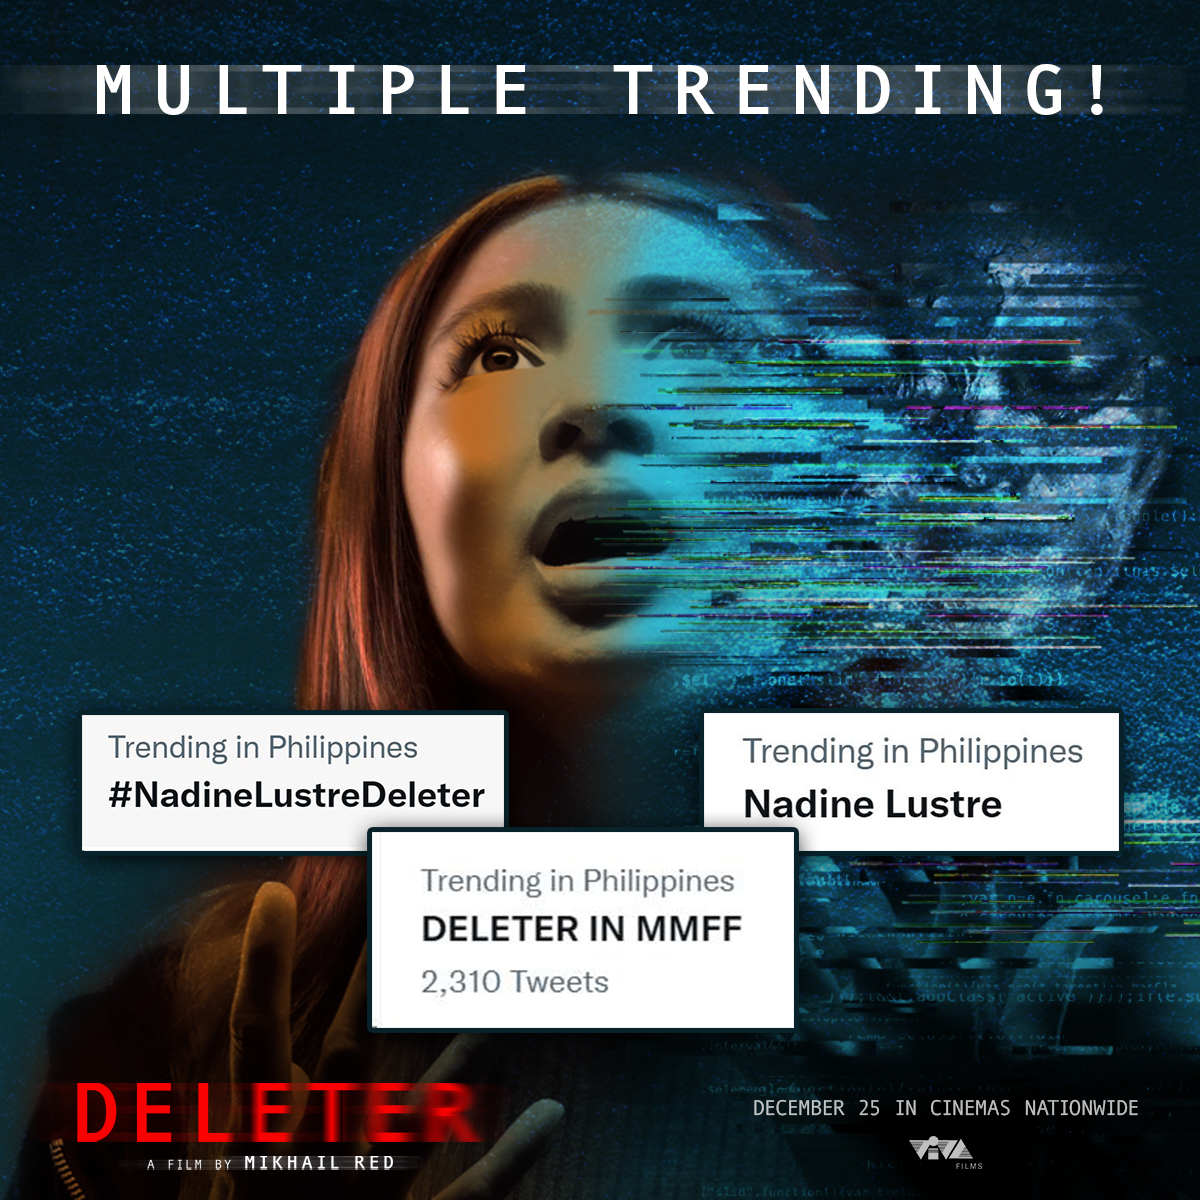 We are TRENDING! Teaser ✔️ First poster ✔️ Full trailer 🤭 soon... 'DELETER' is an official entry to the Metro Manila Film Festiva 2022. A film by Mikhail Red. December 25 in cinemas nationwide. #MMFF2022 #MMFF #Deleter #NadineLustreDeleter #NadineLustre